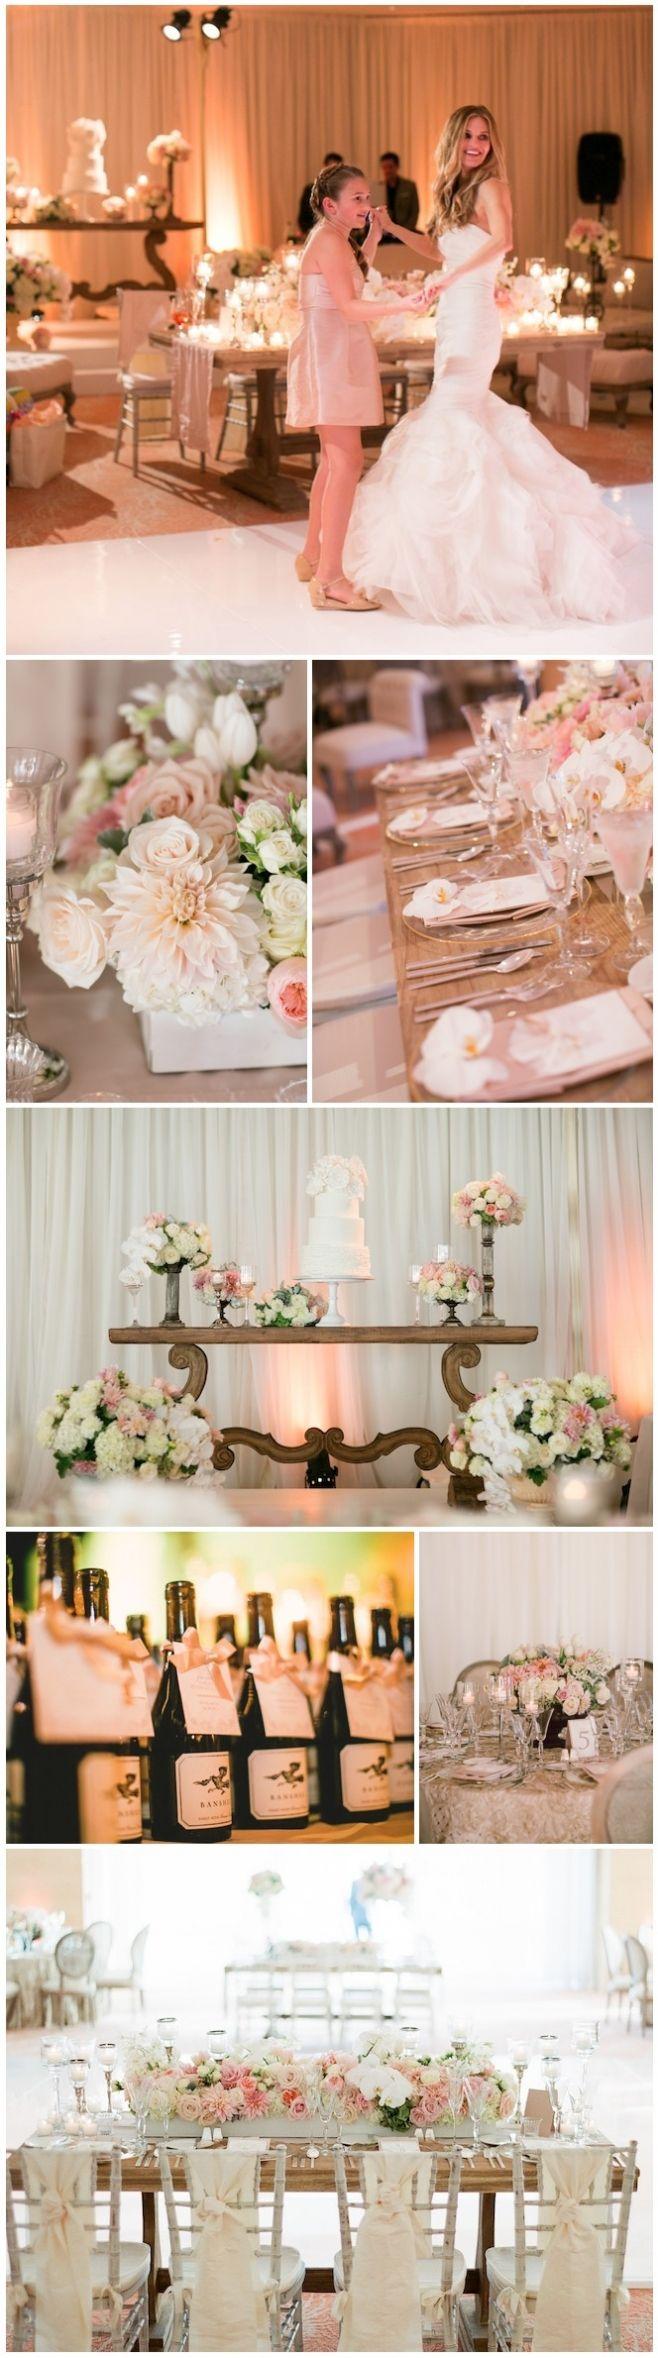 Mariage - Blush Pink- The Most Requested Wedding Color For 2013